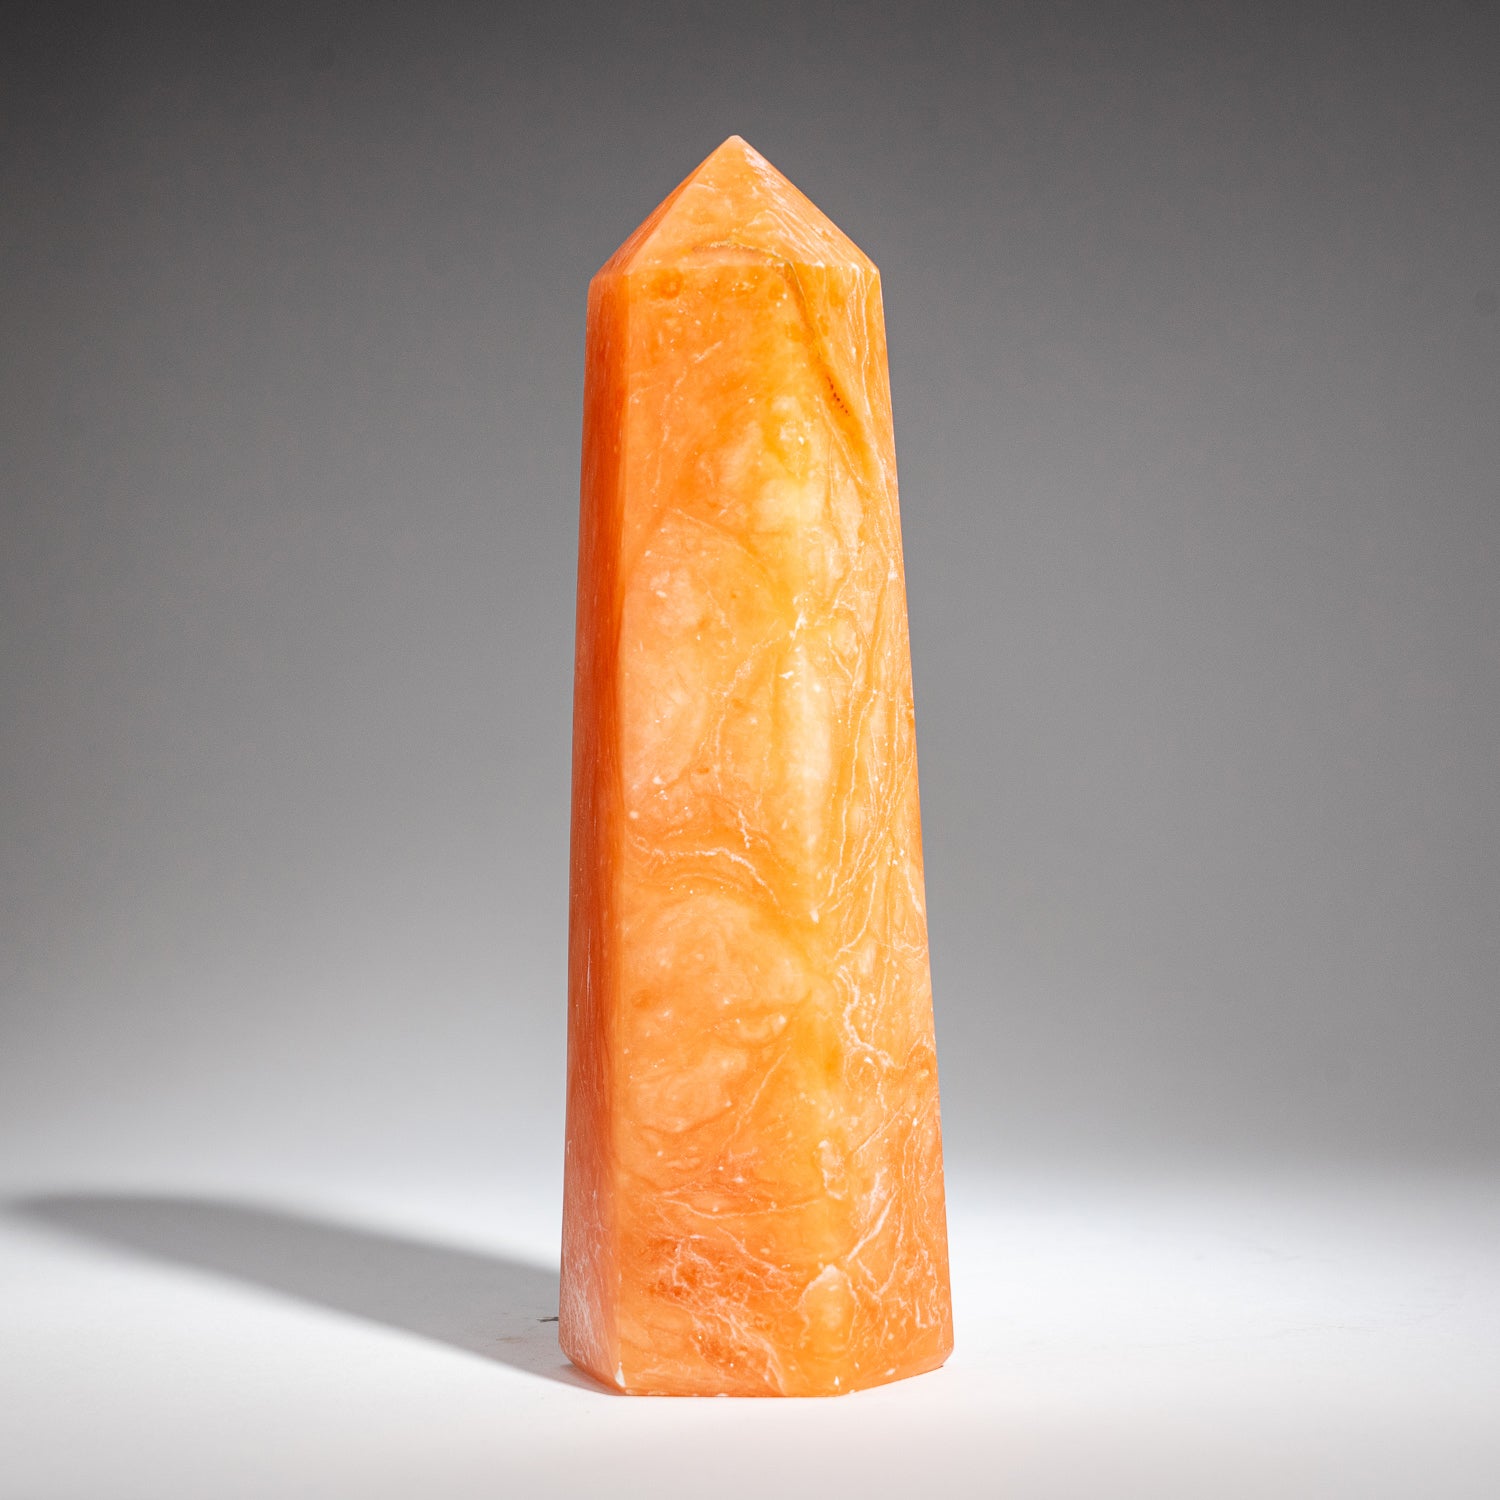 Genuine Polished Orange Selenite Point from Morocco (2.5 lbs)